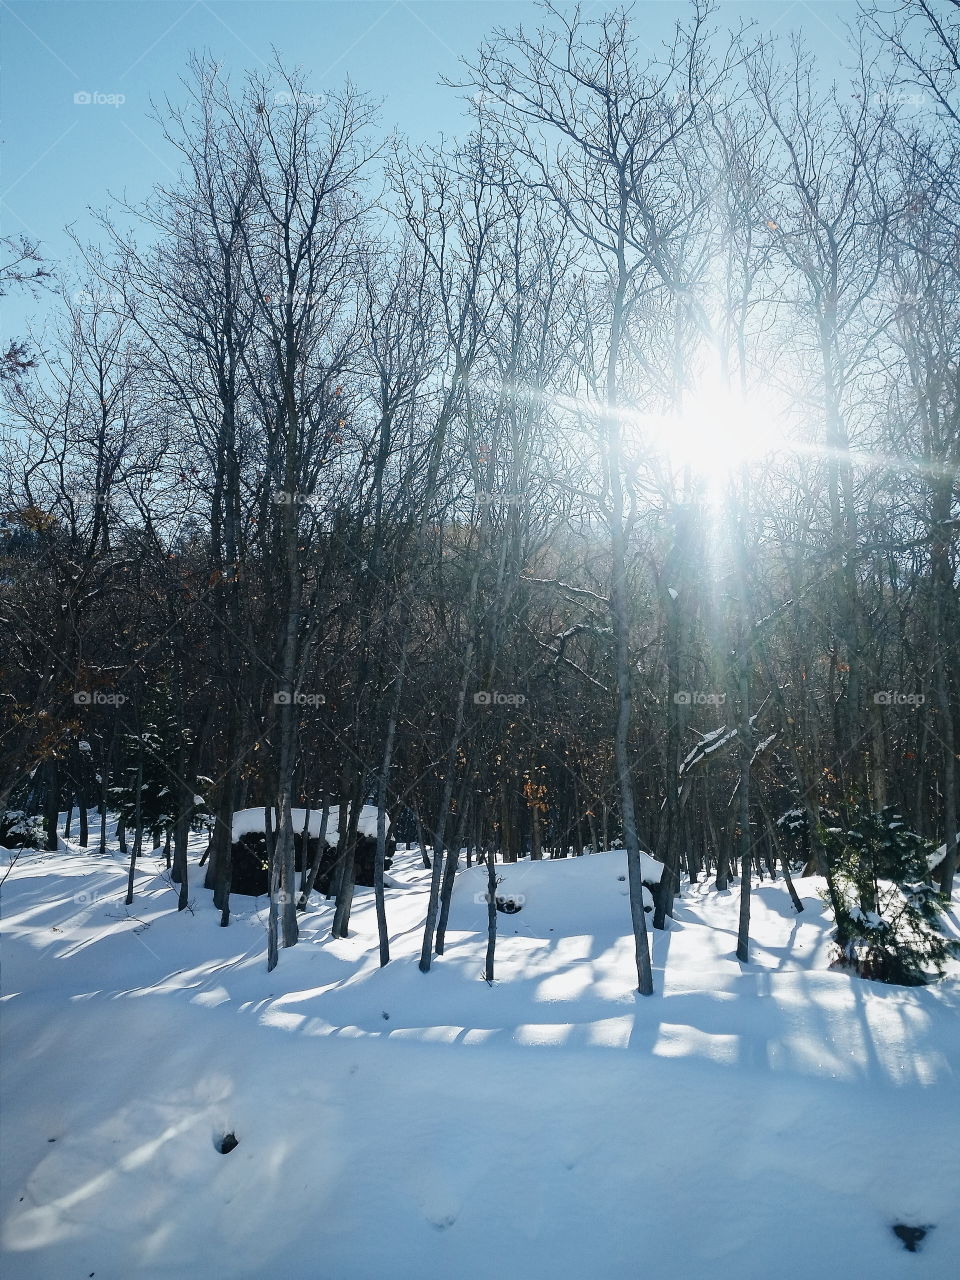 Winter forest. Sun flare through bare trees in snow